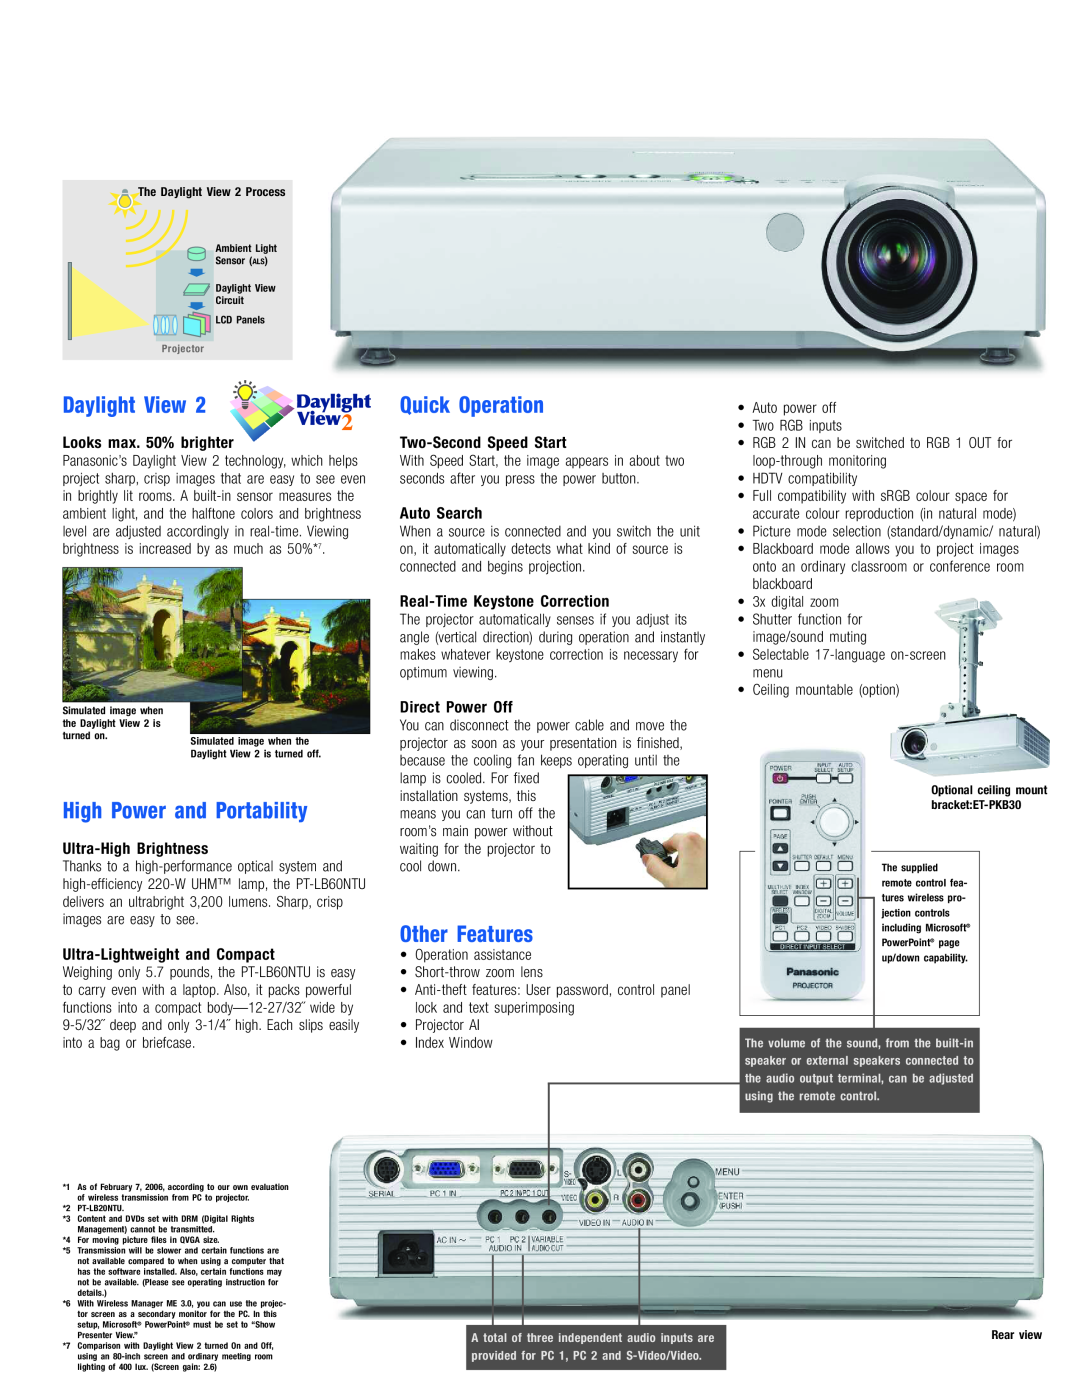 Panasonic PT-LB60NTU Daylight View, High Power and Portability, Quick Operation, Other Features, Looks max. 50% brighter 